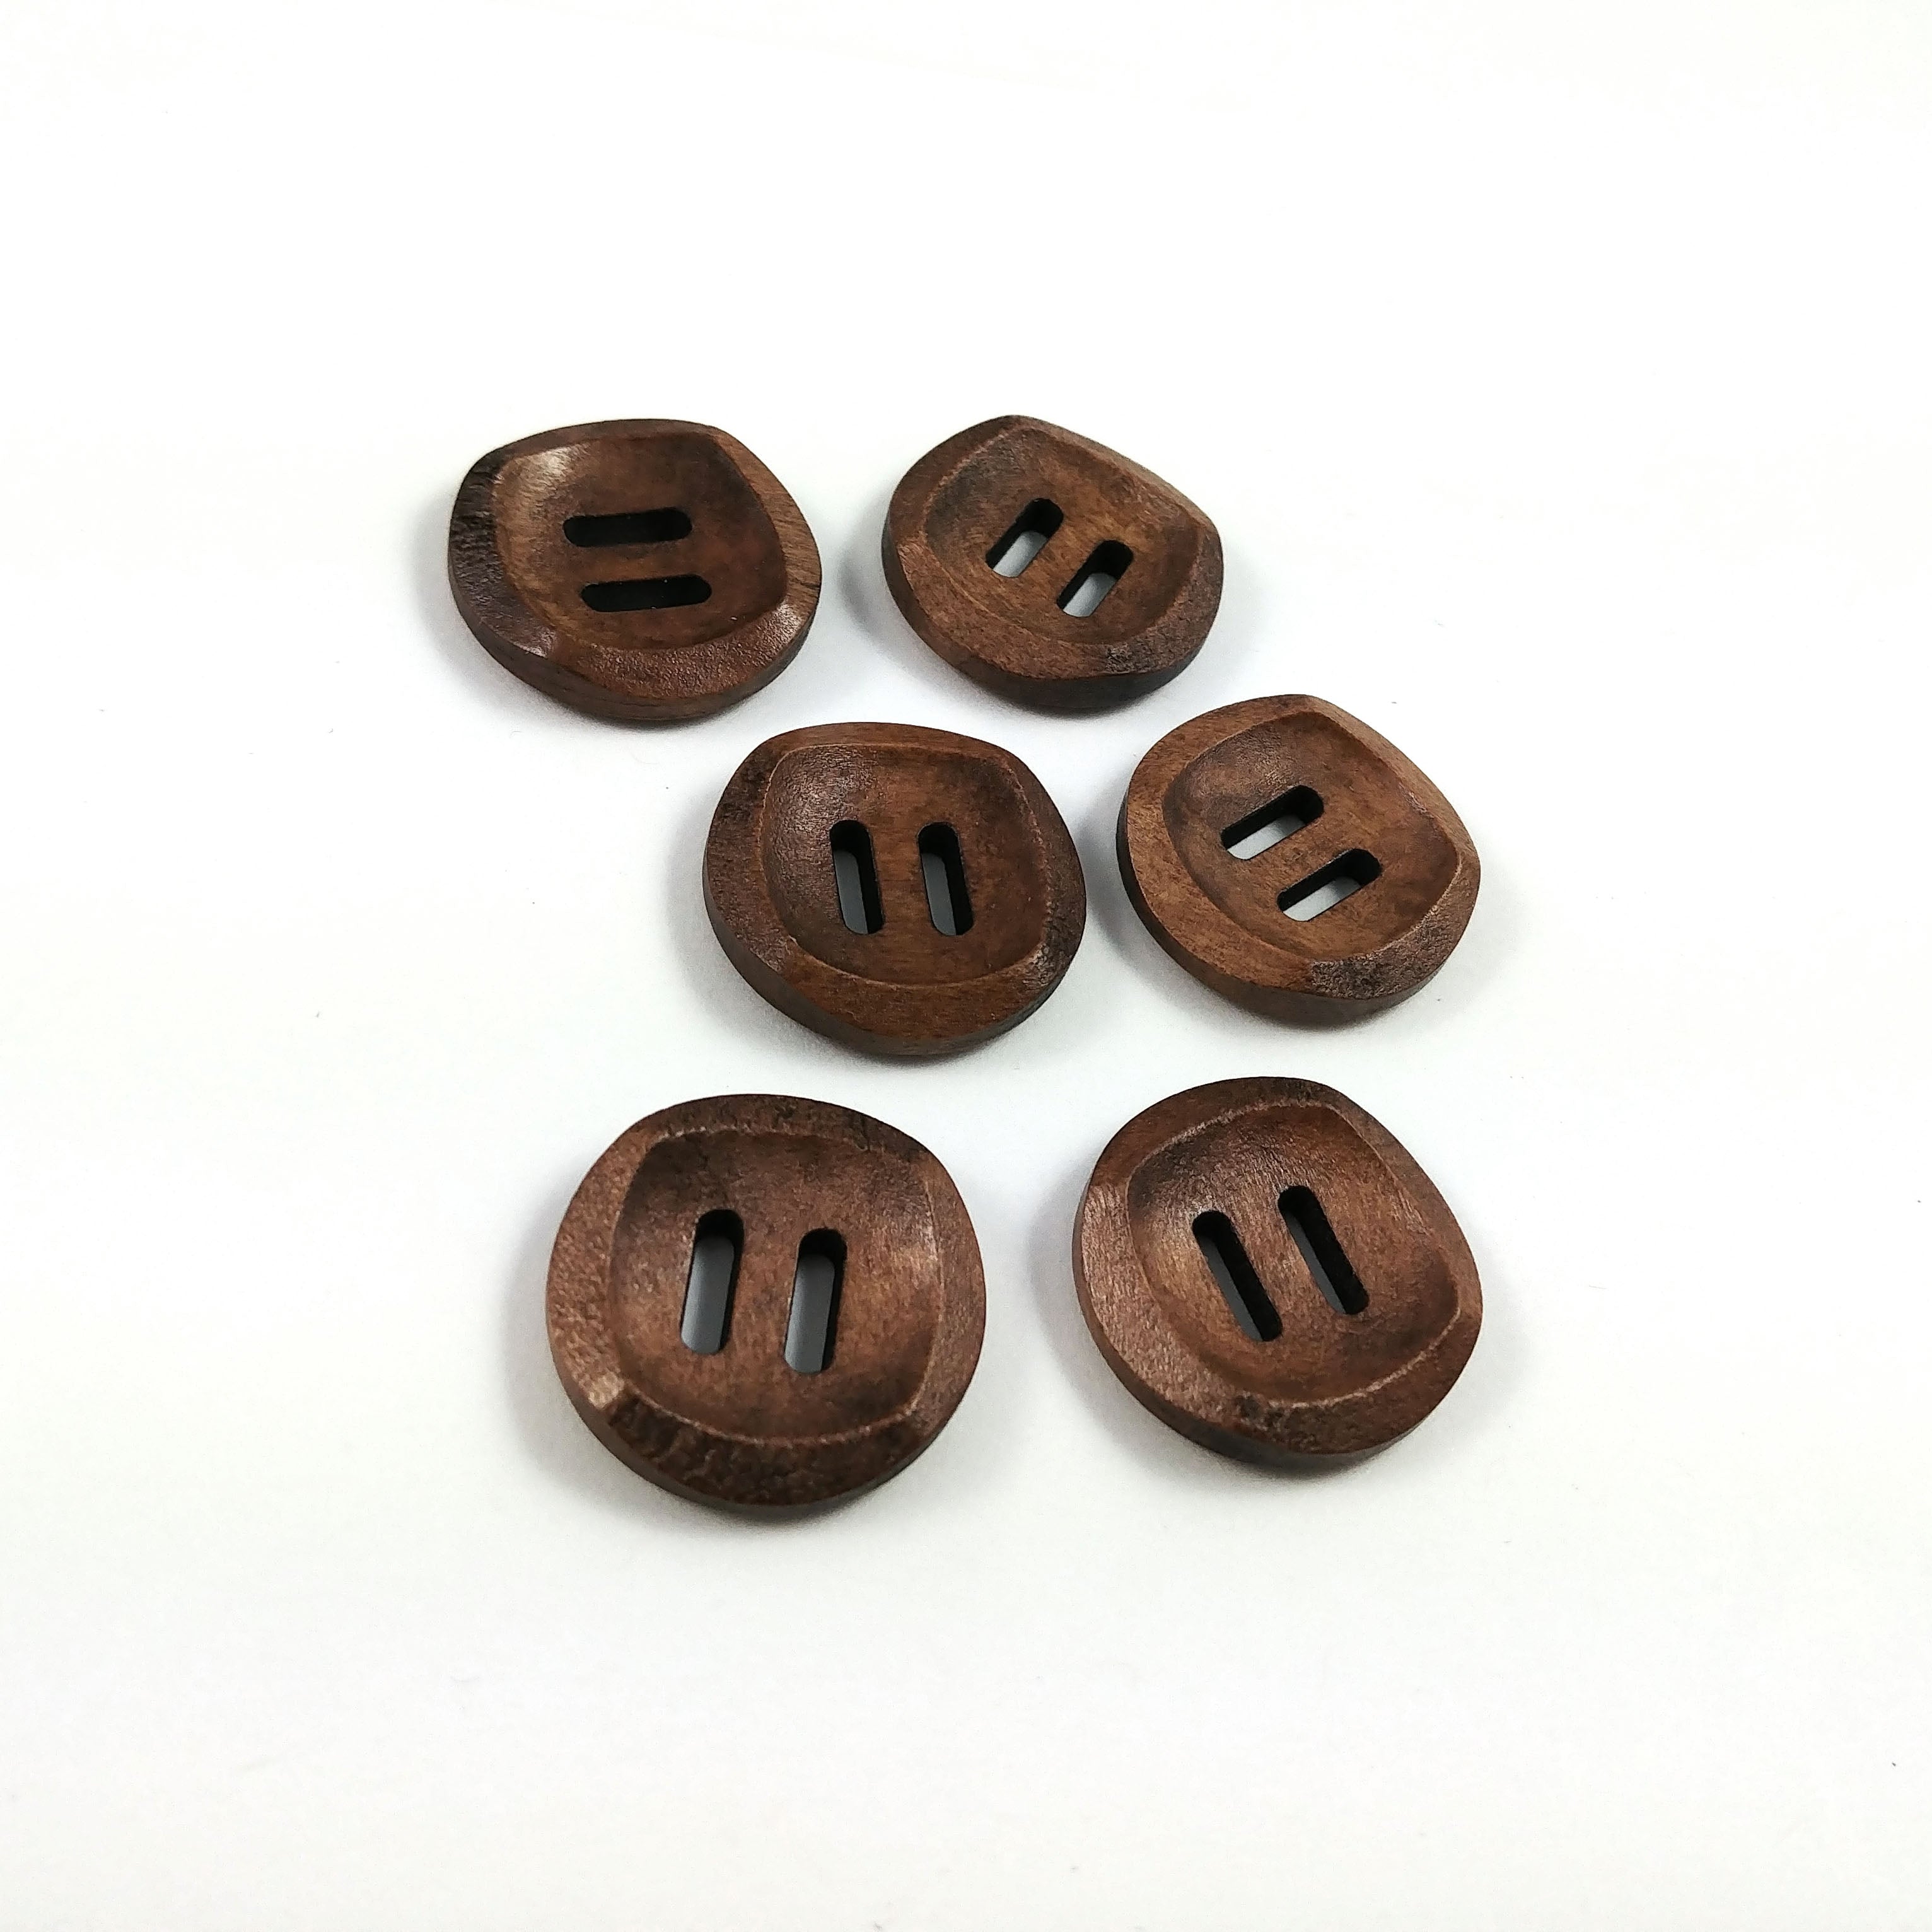 2 Hole Coconut Wood Buttons, 25mm Buttons, Sewing, Crafts, Round